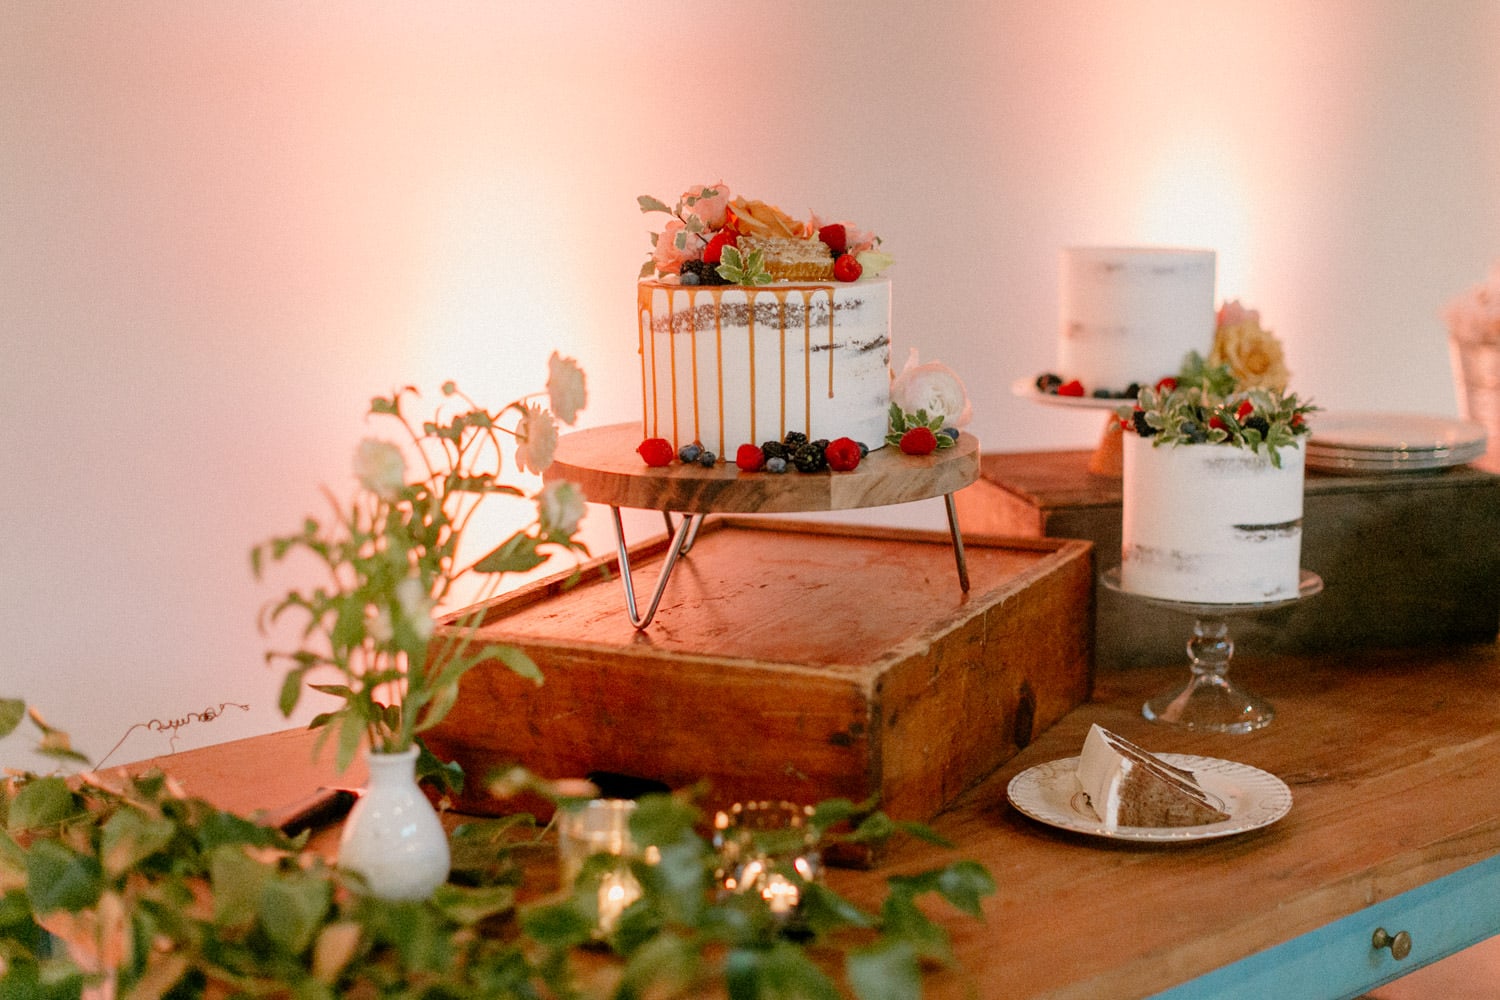 A display of wedding cakes and desserts at Everett West in Portland, OR.